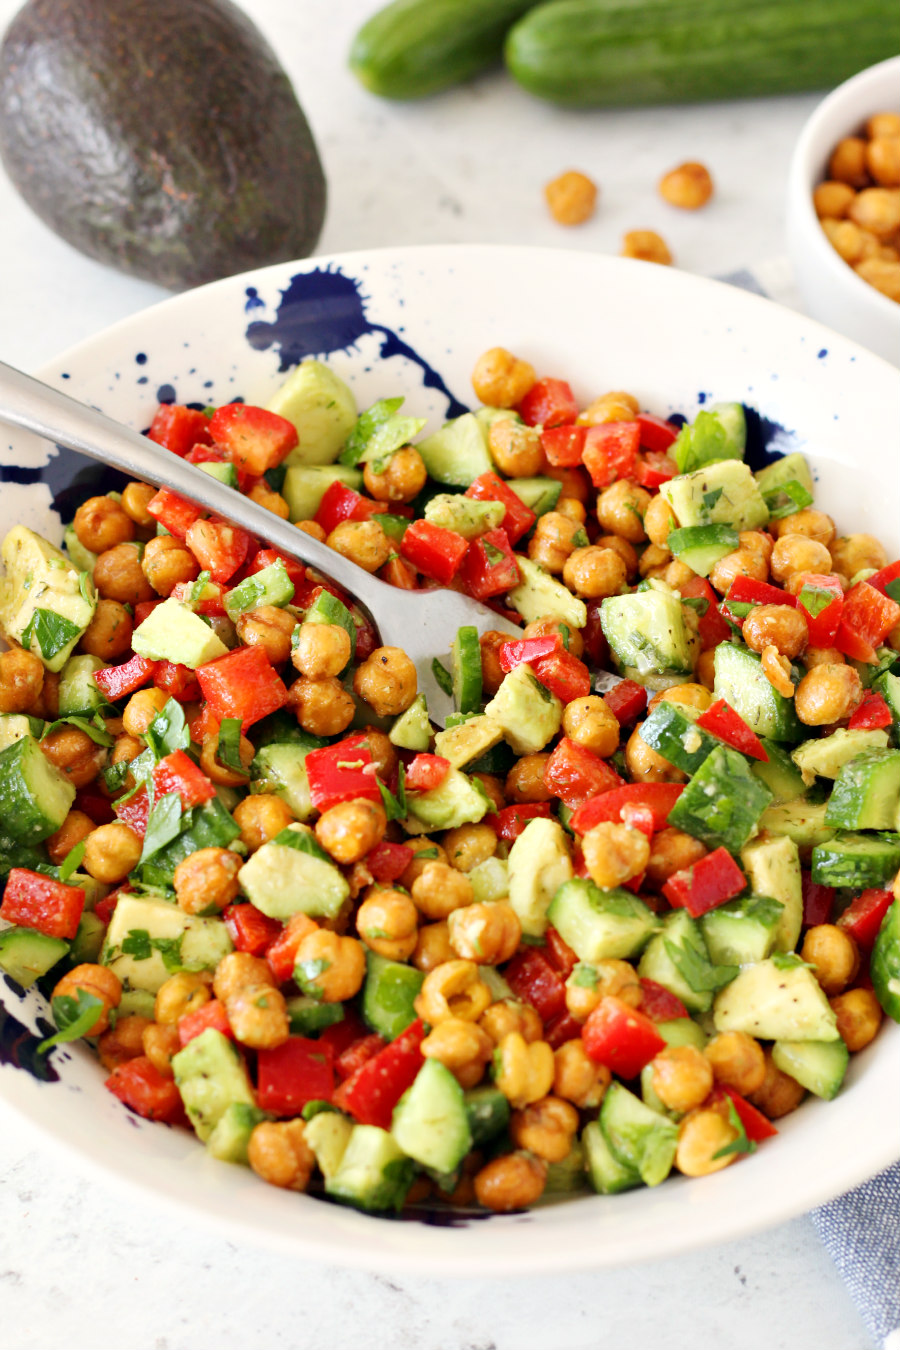 Fork siting in a bowl of Crispy Chickpea and Avocado Salad. Avocado, cucumbers, and crispy chickpeas in the background.